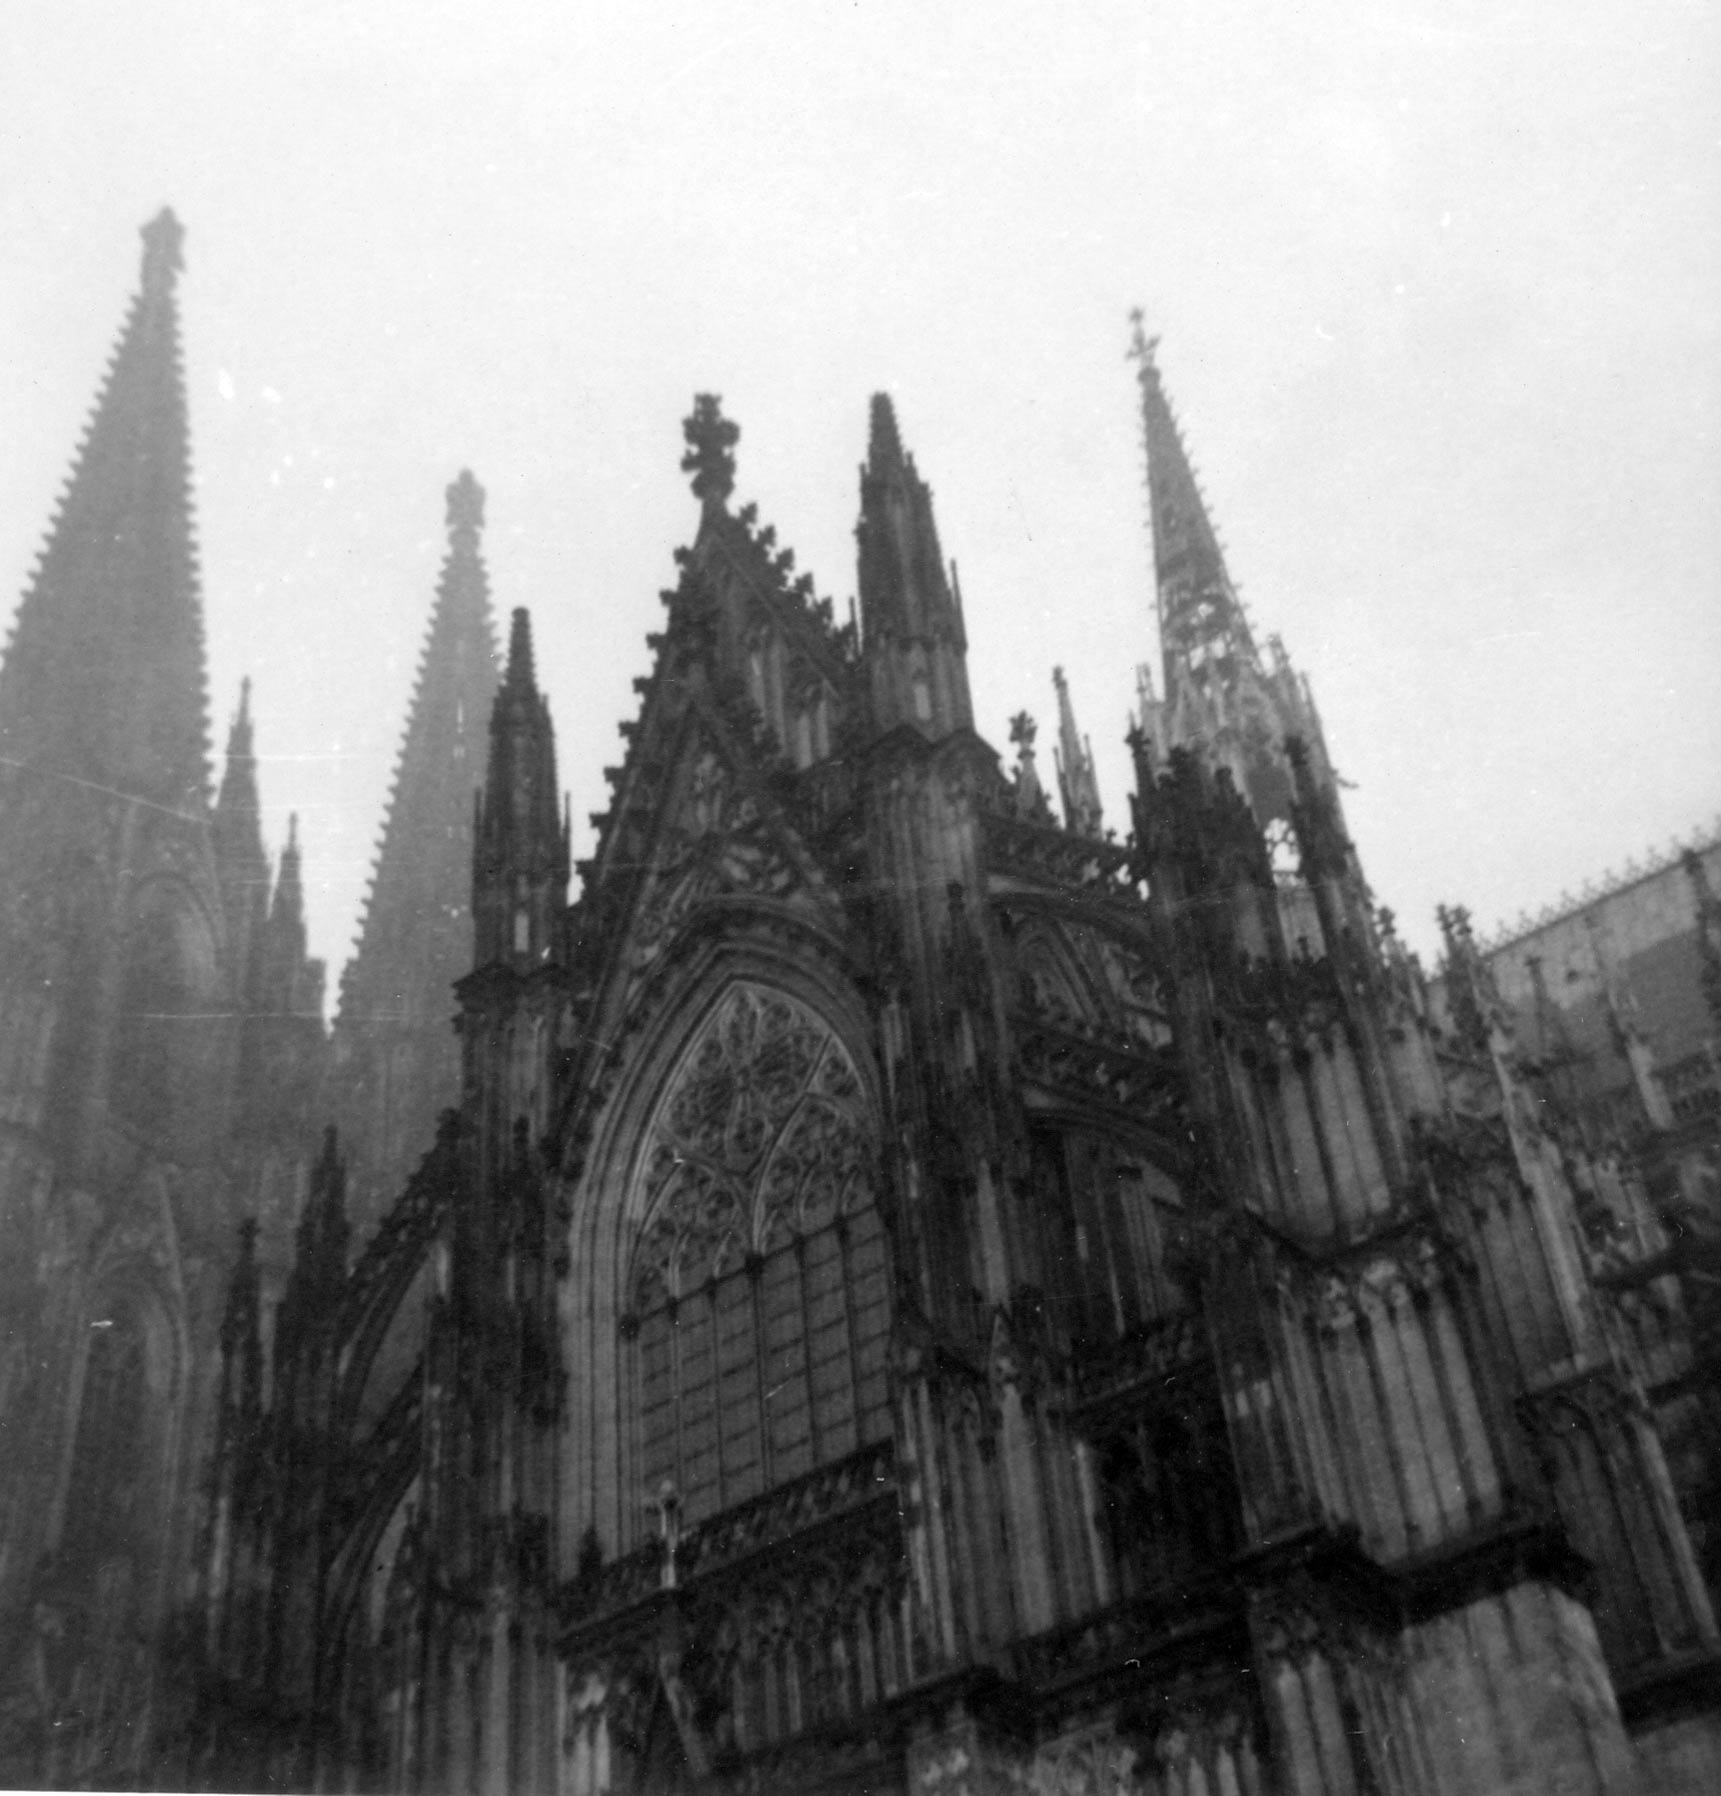 The cathedral in Köln